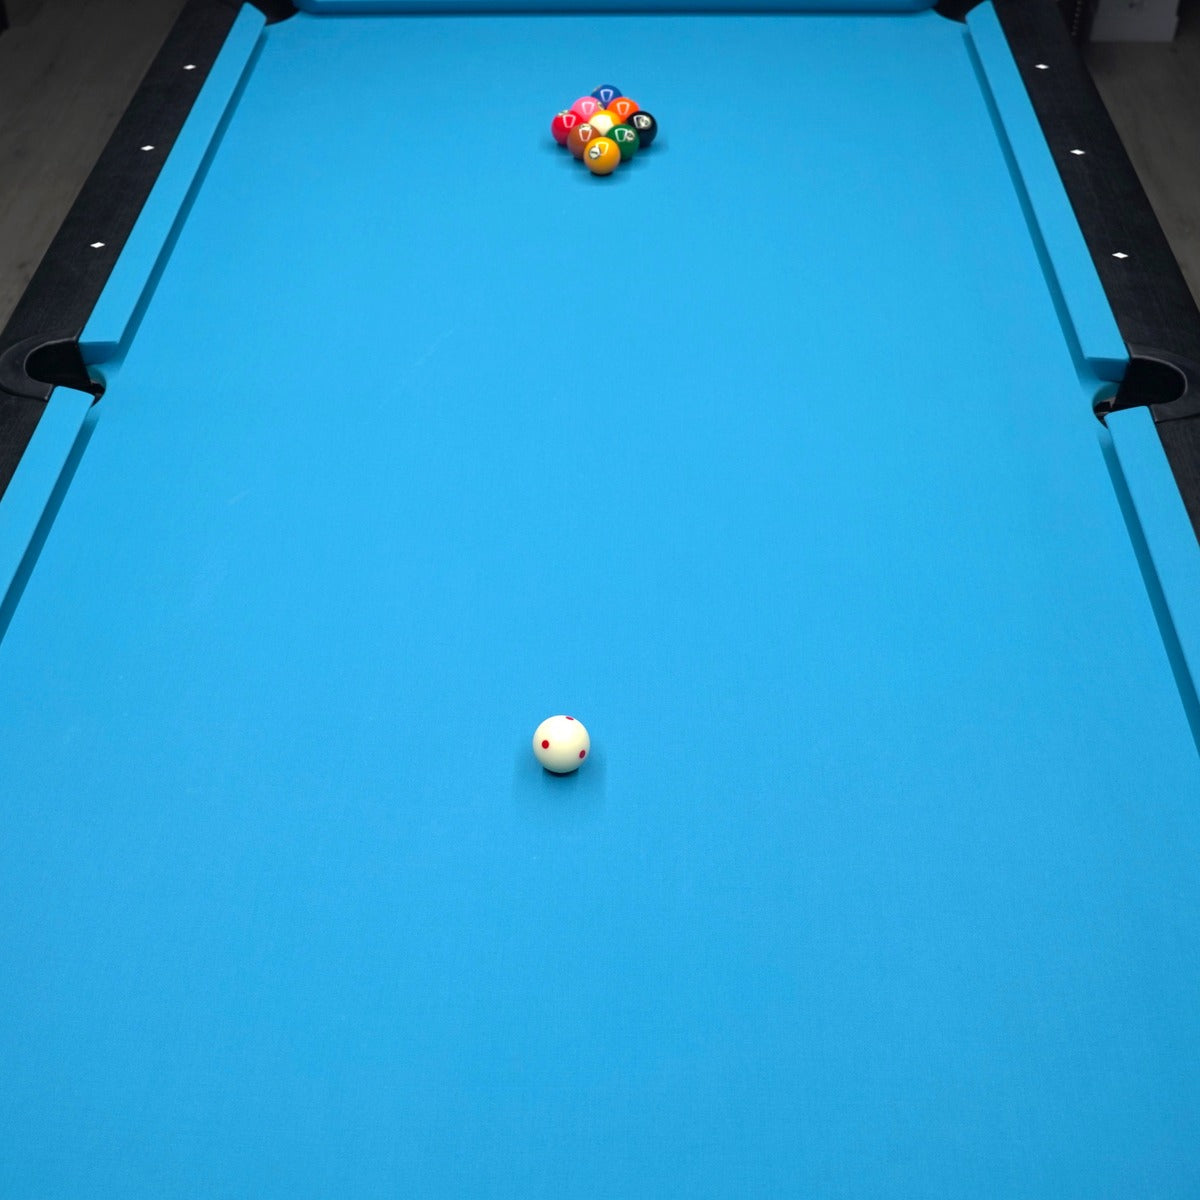 pool table light evenly lighten up the table